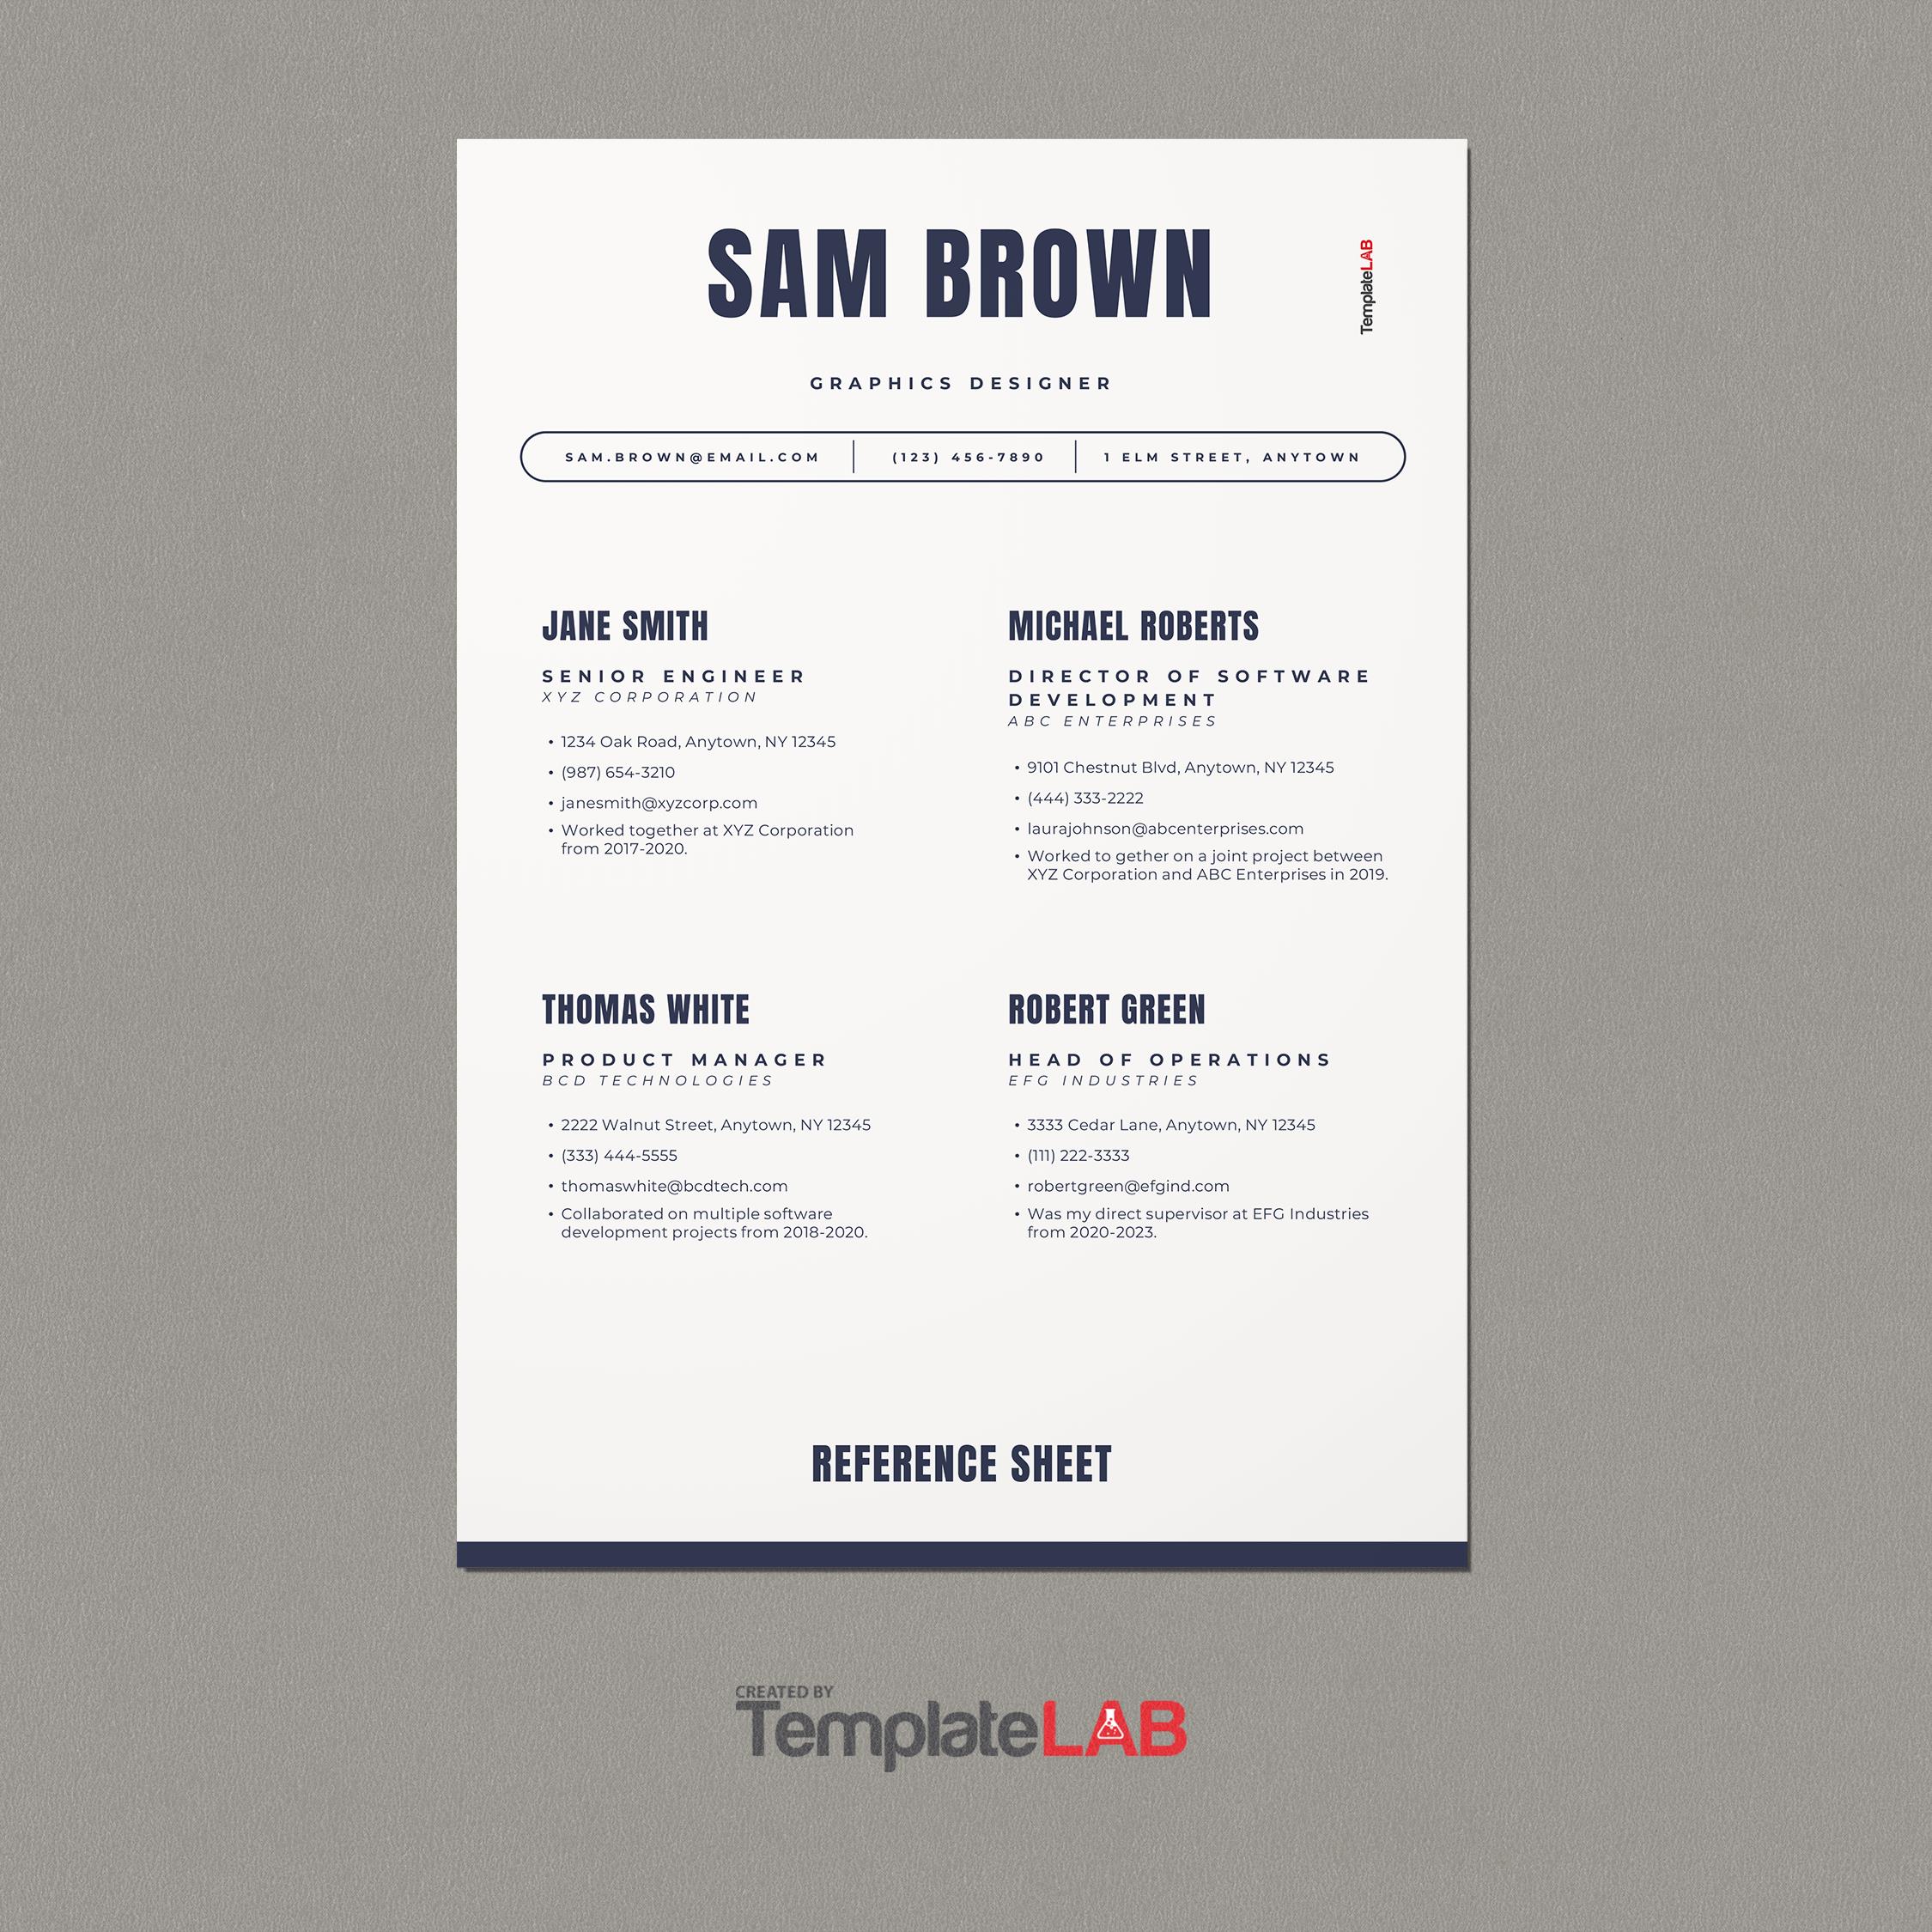 Free Reference Sheet Template